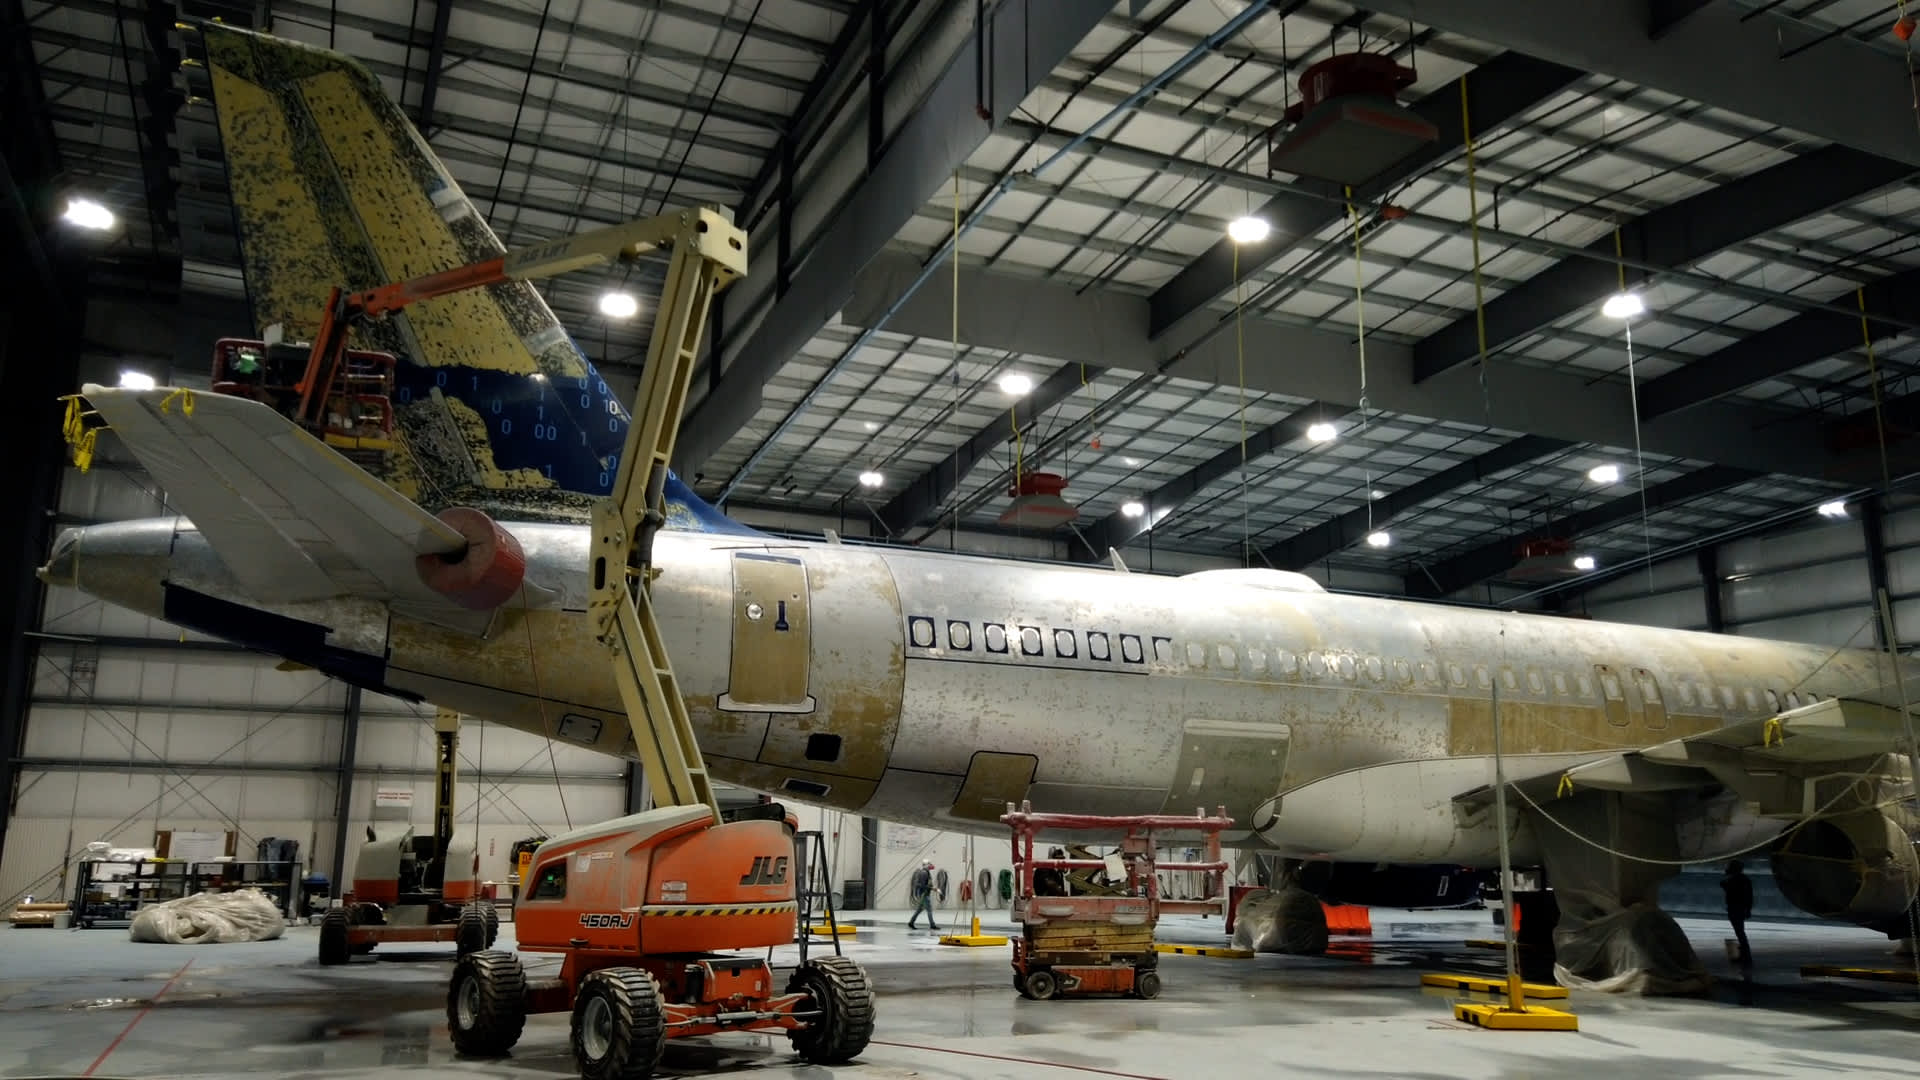 It costs over $200,000 to paint a plane — here’s a look into the $18 billion aircraft paint industry